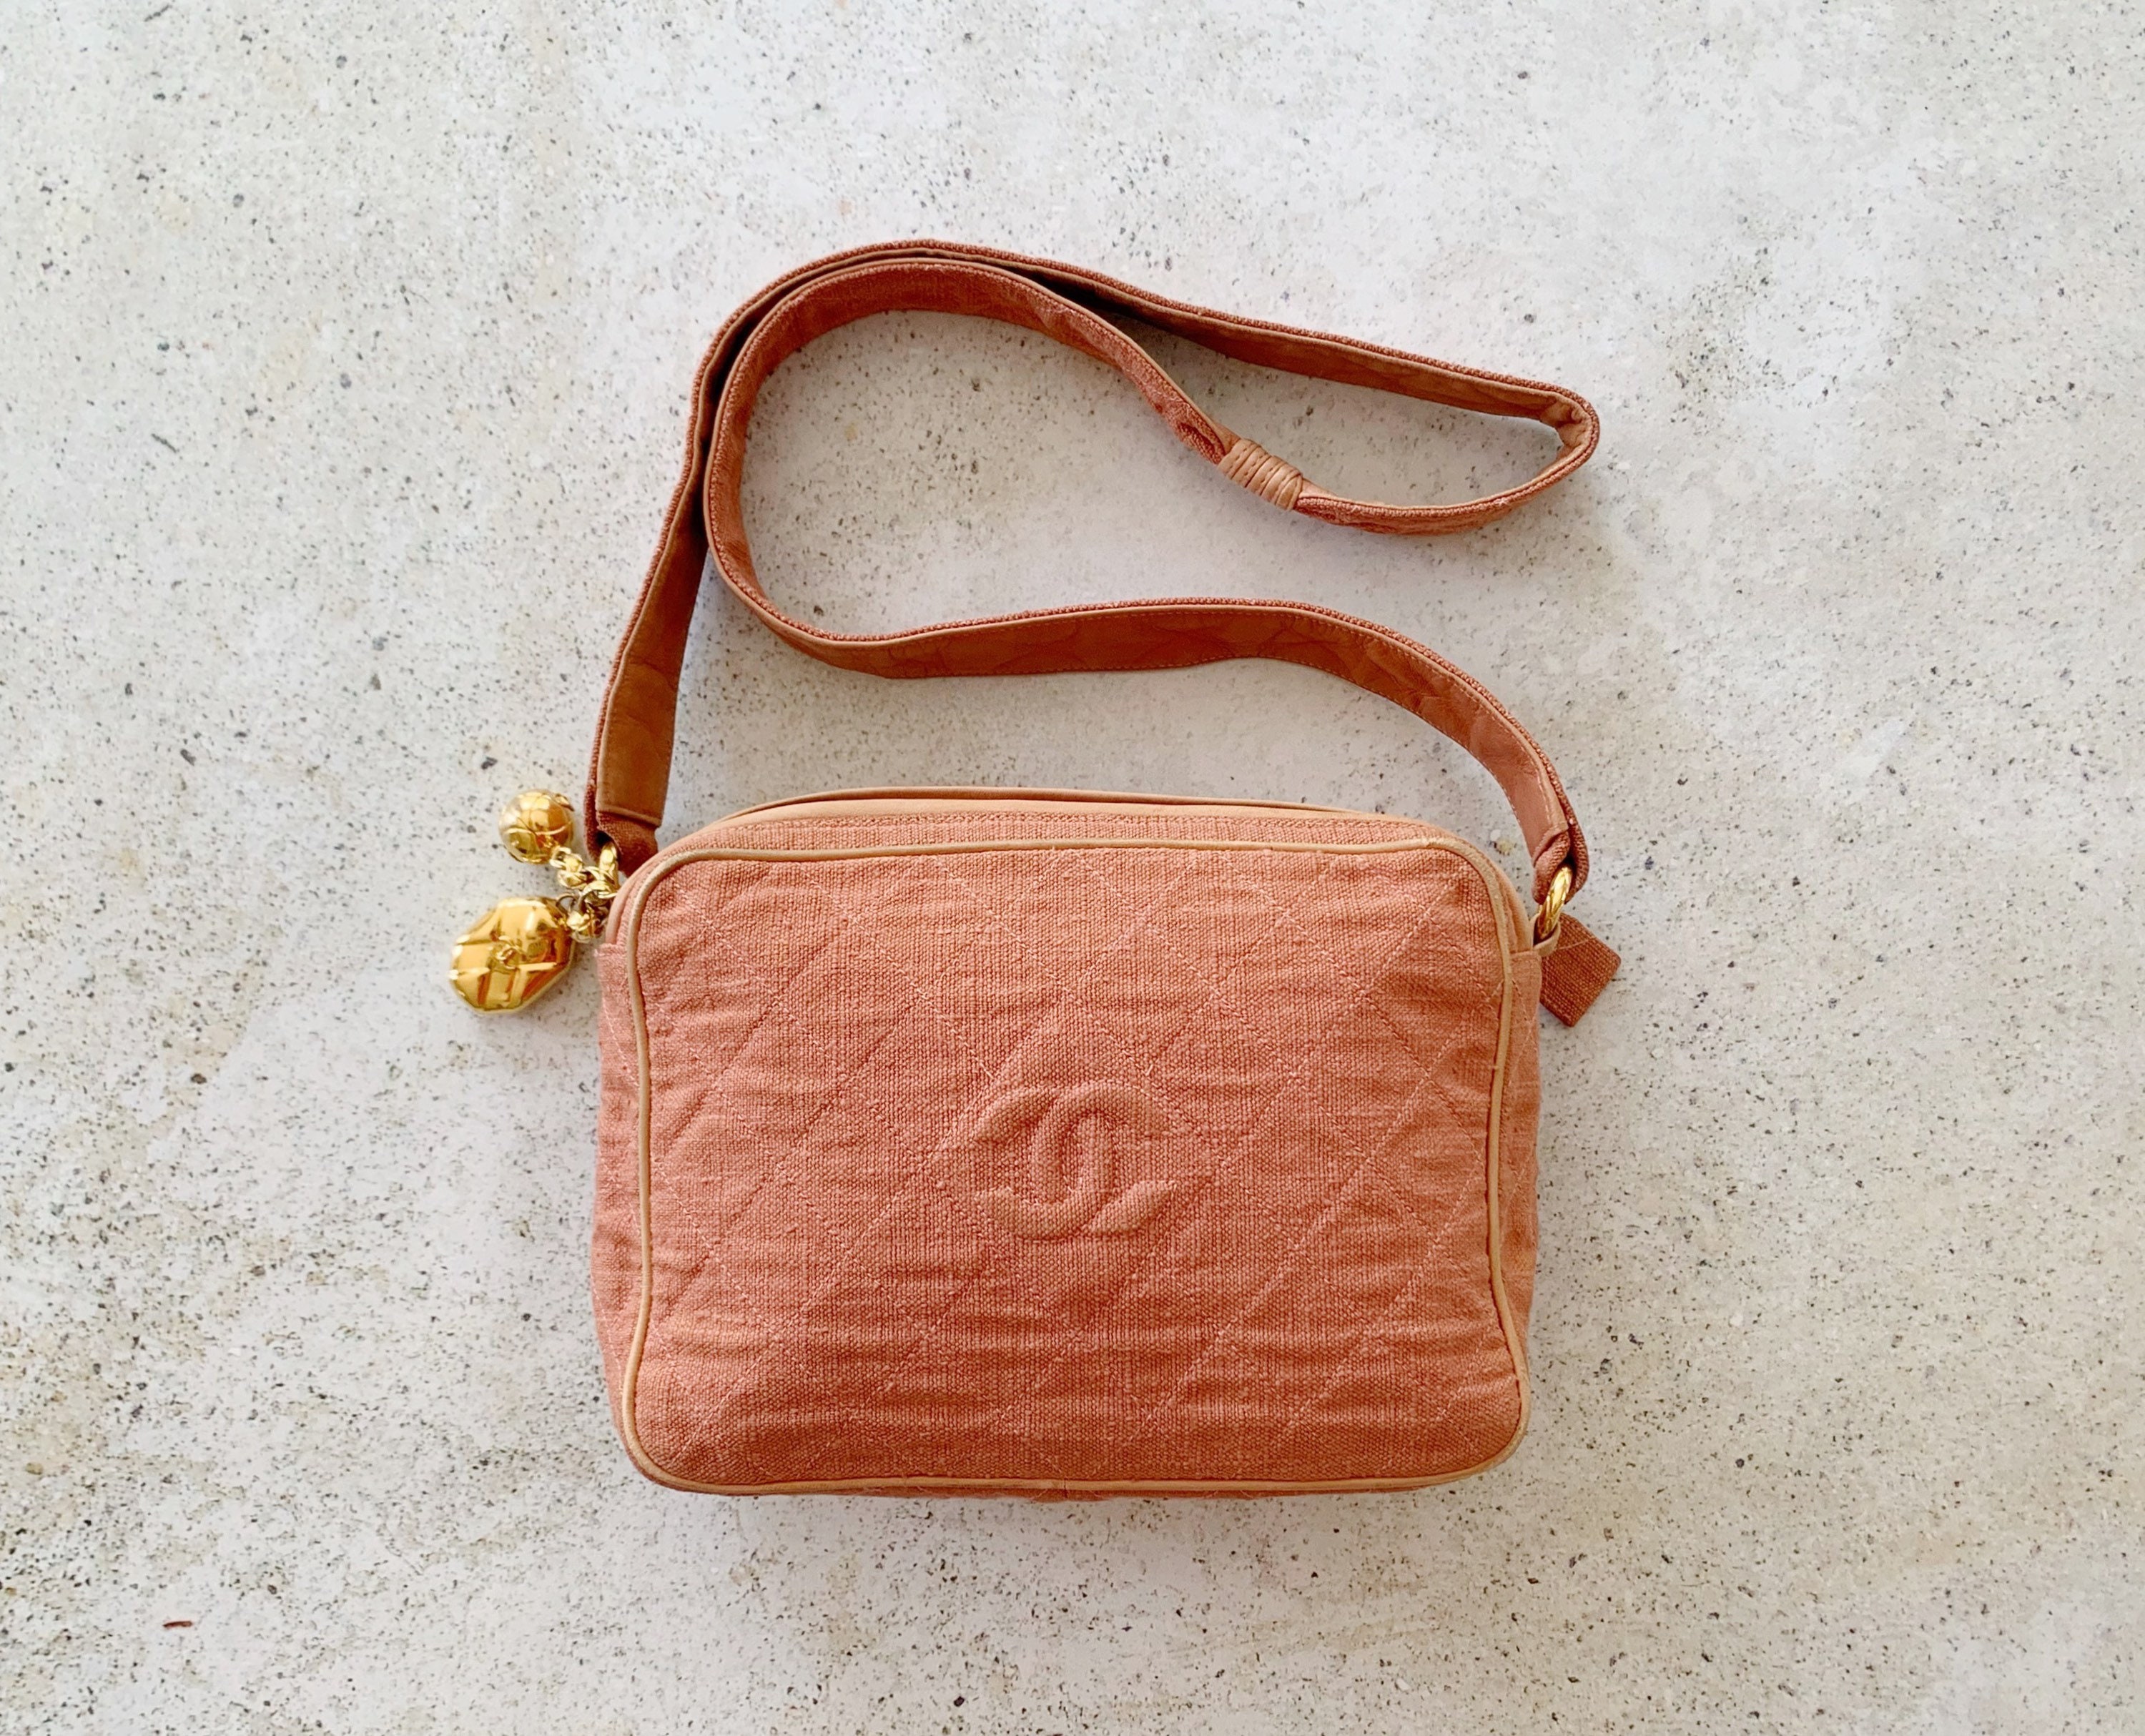 Vintage Bag  CHANEL Quilted Camera Matelasse Cotton Linen Shoulder Bag  Purse 80s Neutral Earth Clay Peach